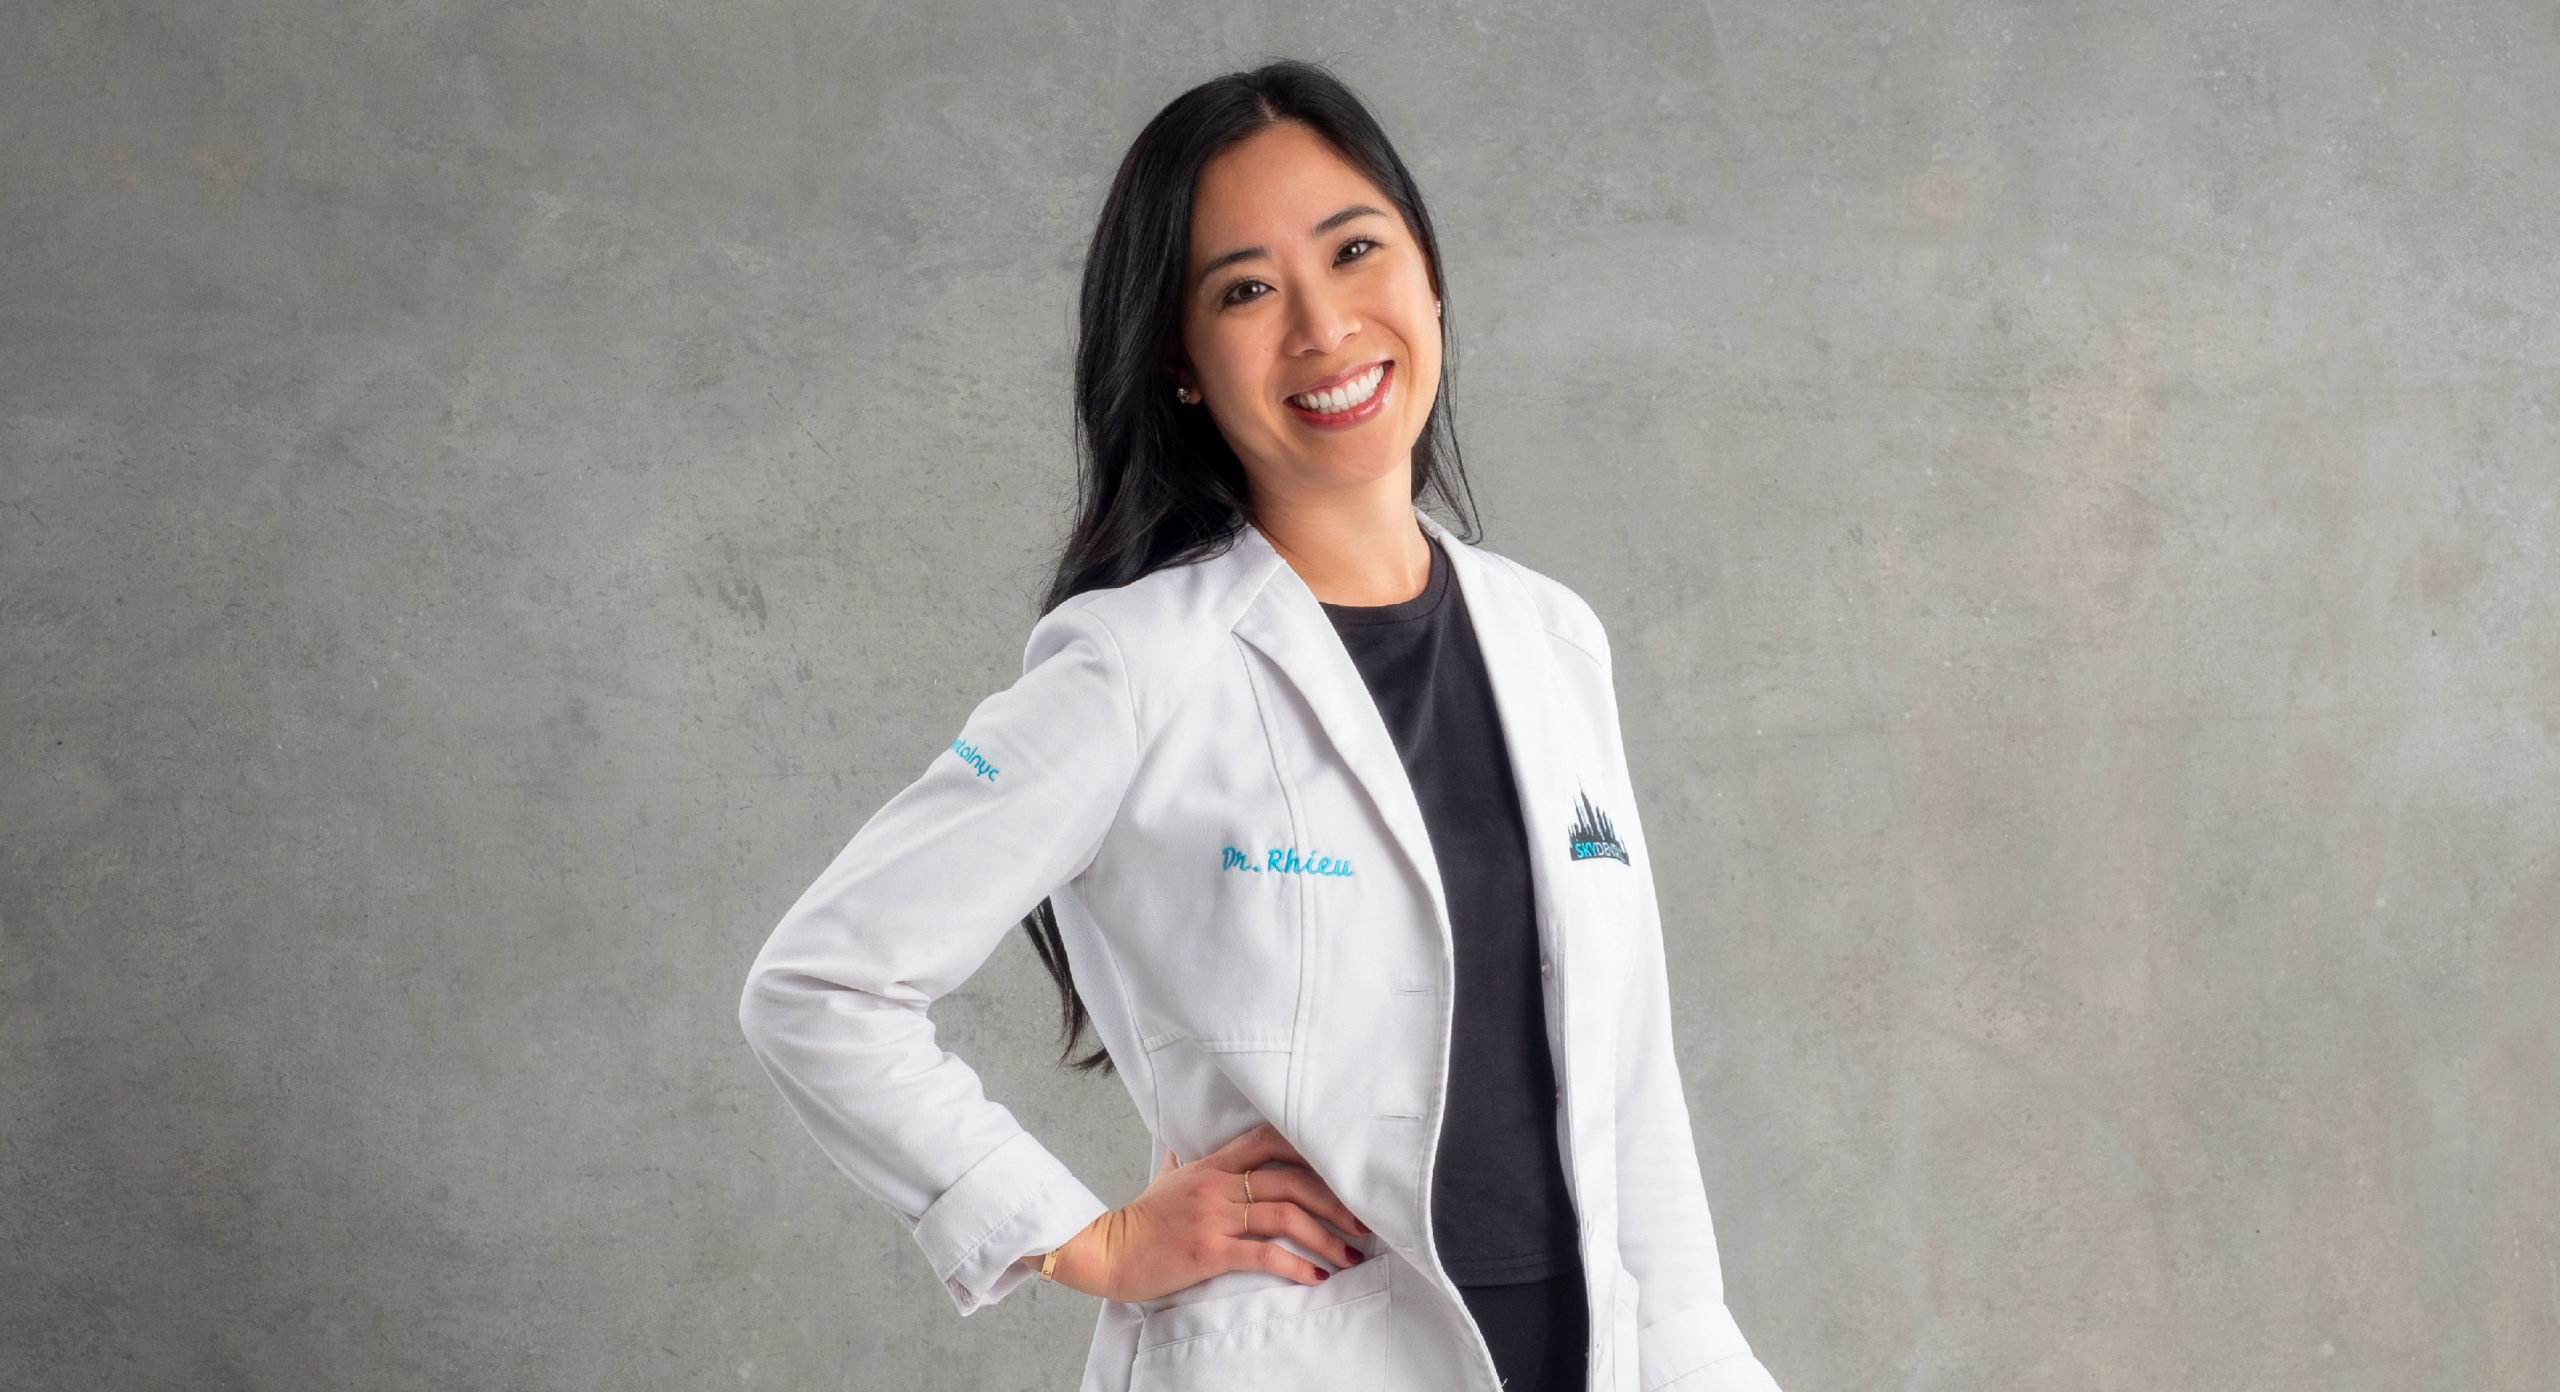 Dr. Wonnie Rhieu, founder of Sky Dental NYC, smiling, hand on hip. Dr. Rhieu is a cosmetic and general dentist.